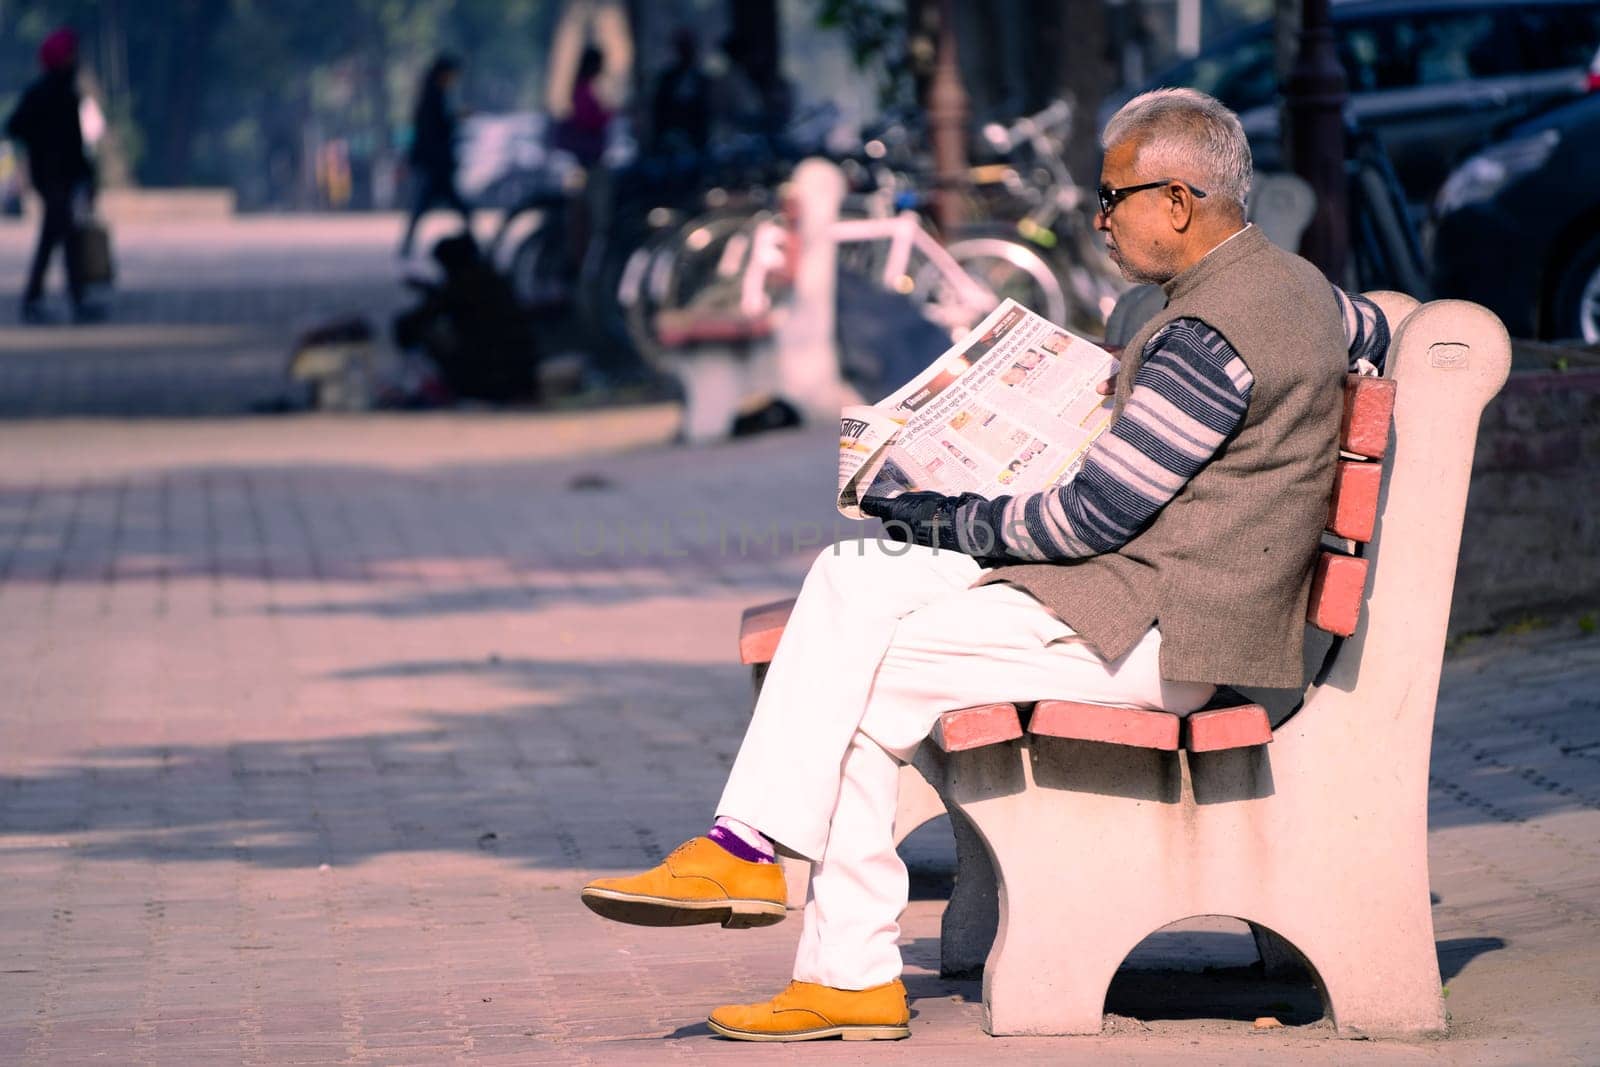 Old man sitting on sunny park bench reading newspaper in sector 17 market in chandigarh, showing this famous landmark shopping area in the city beautiful by Shalinimathur